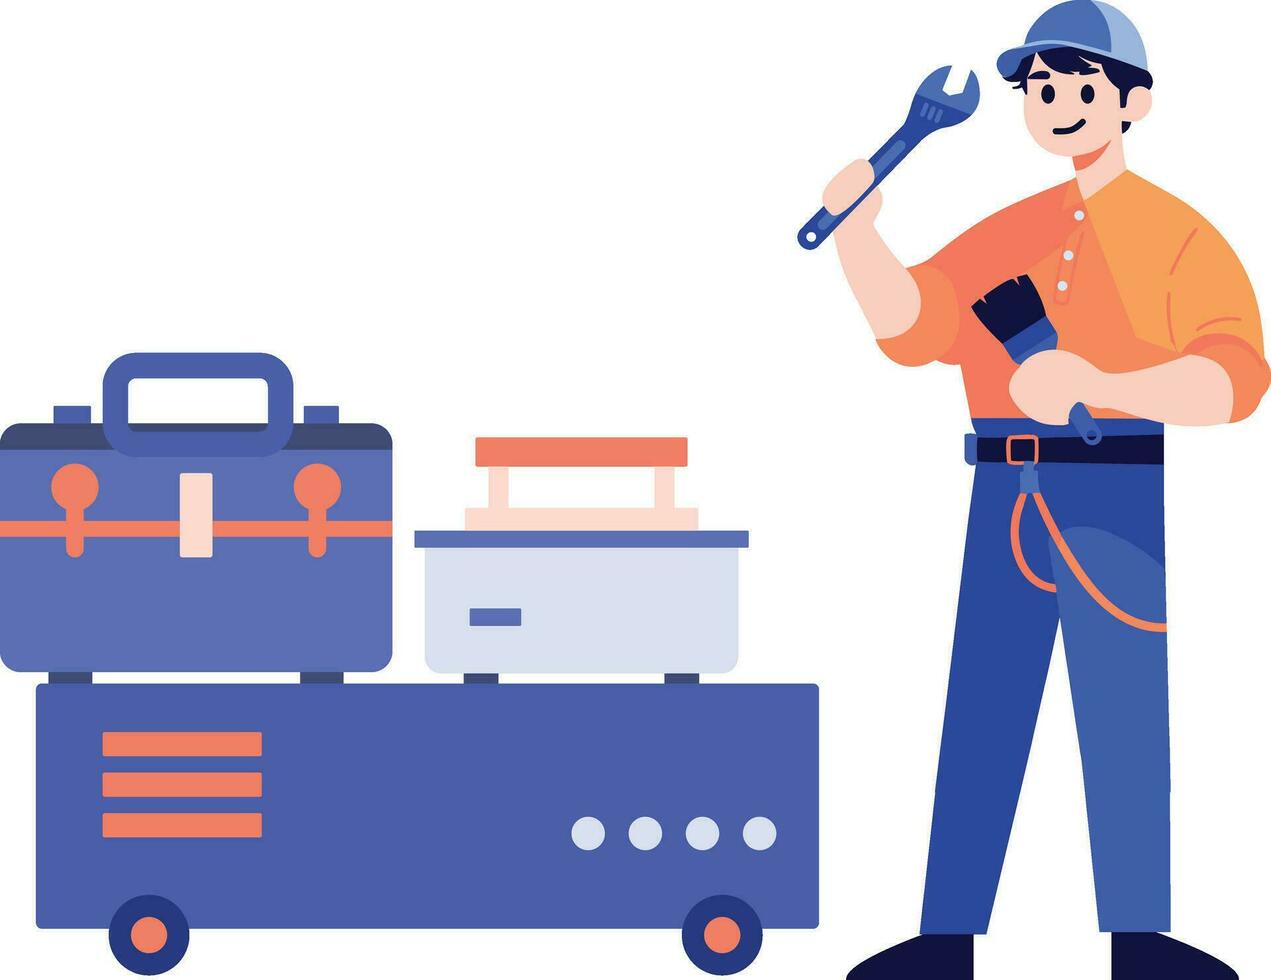 Hand Drawn Technician or engineer with toolbox in flat style vector